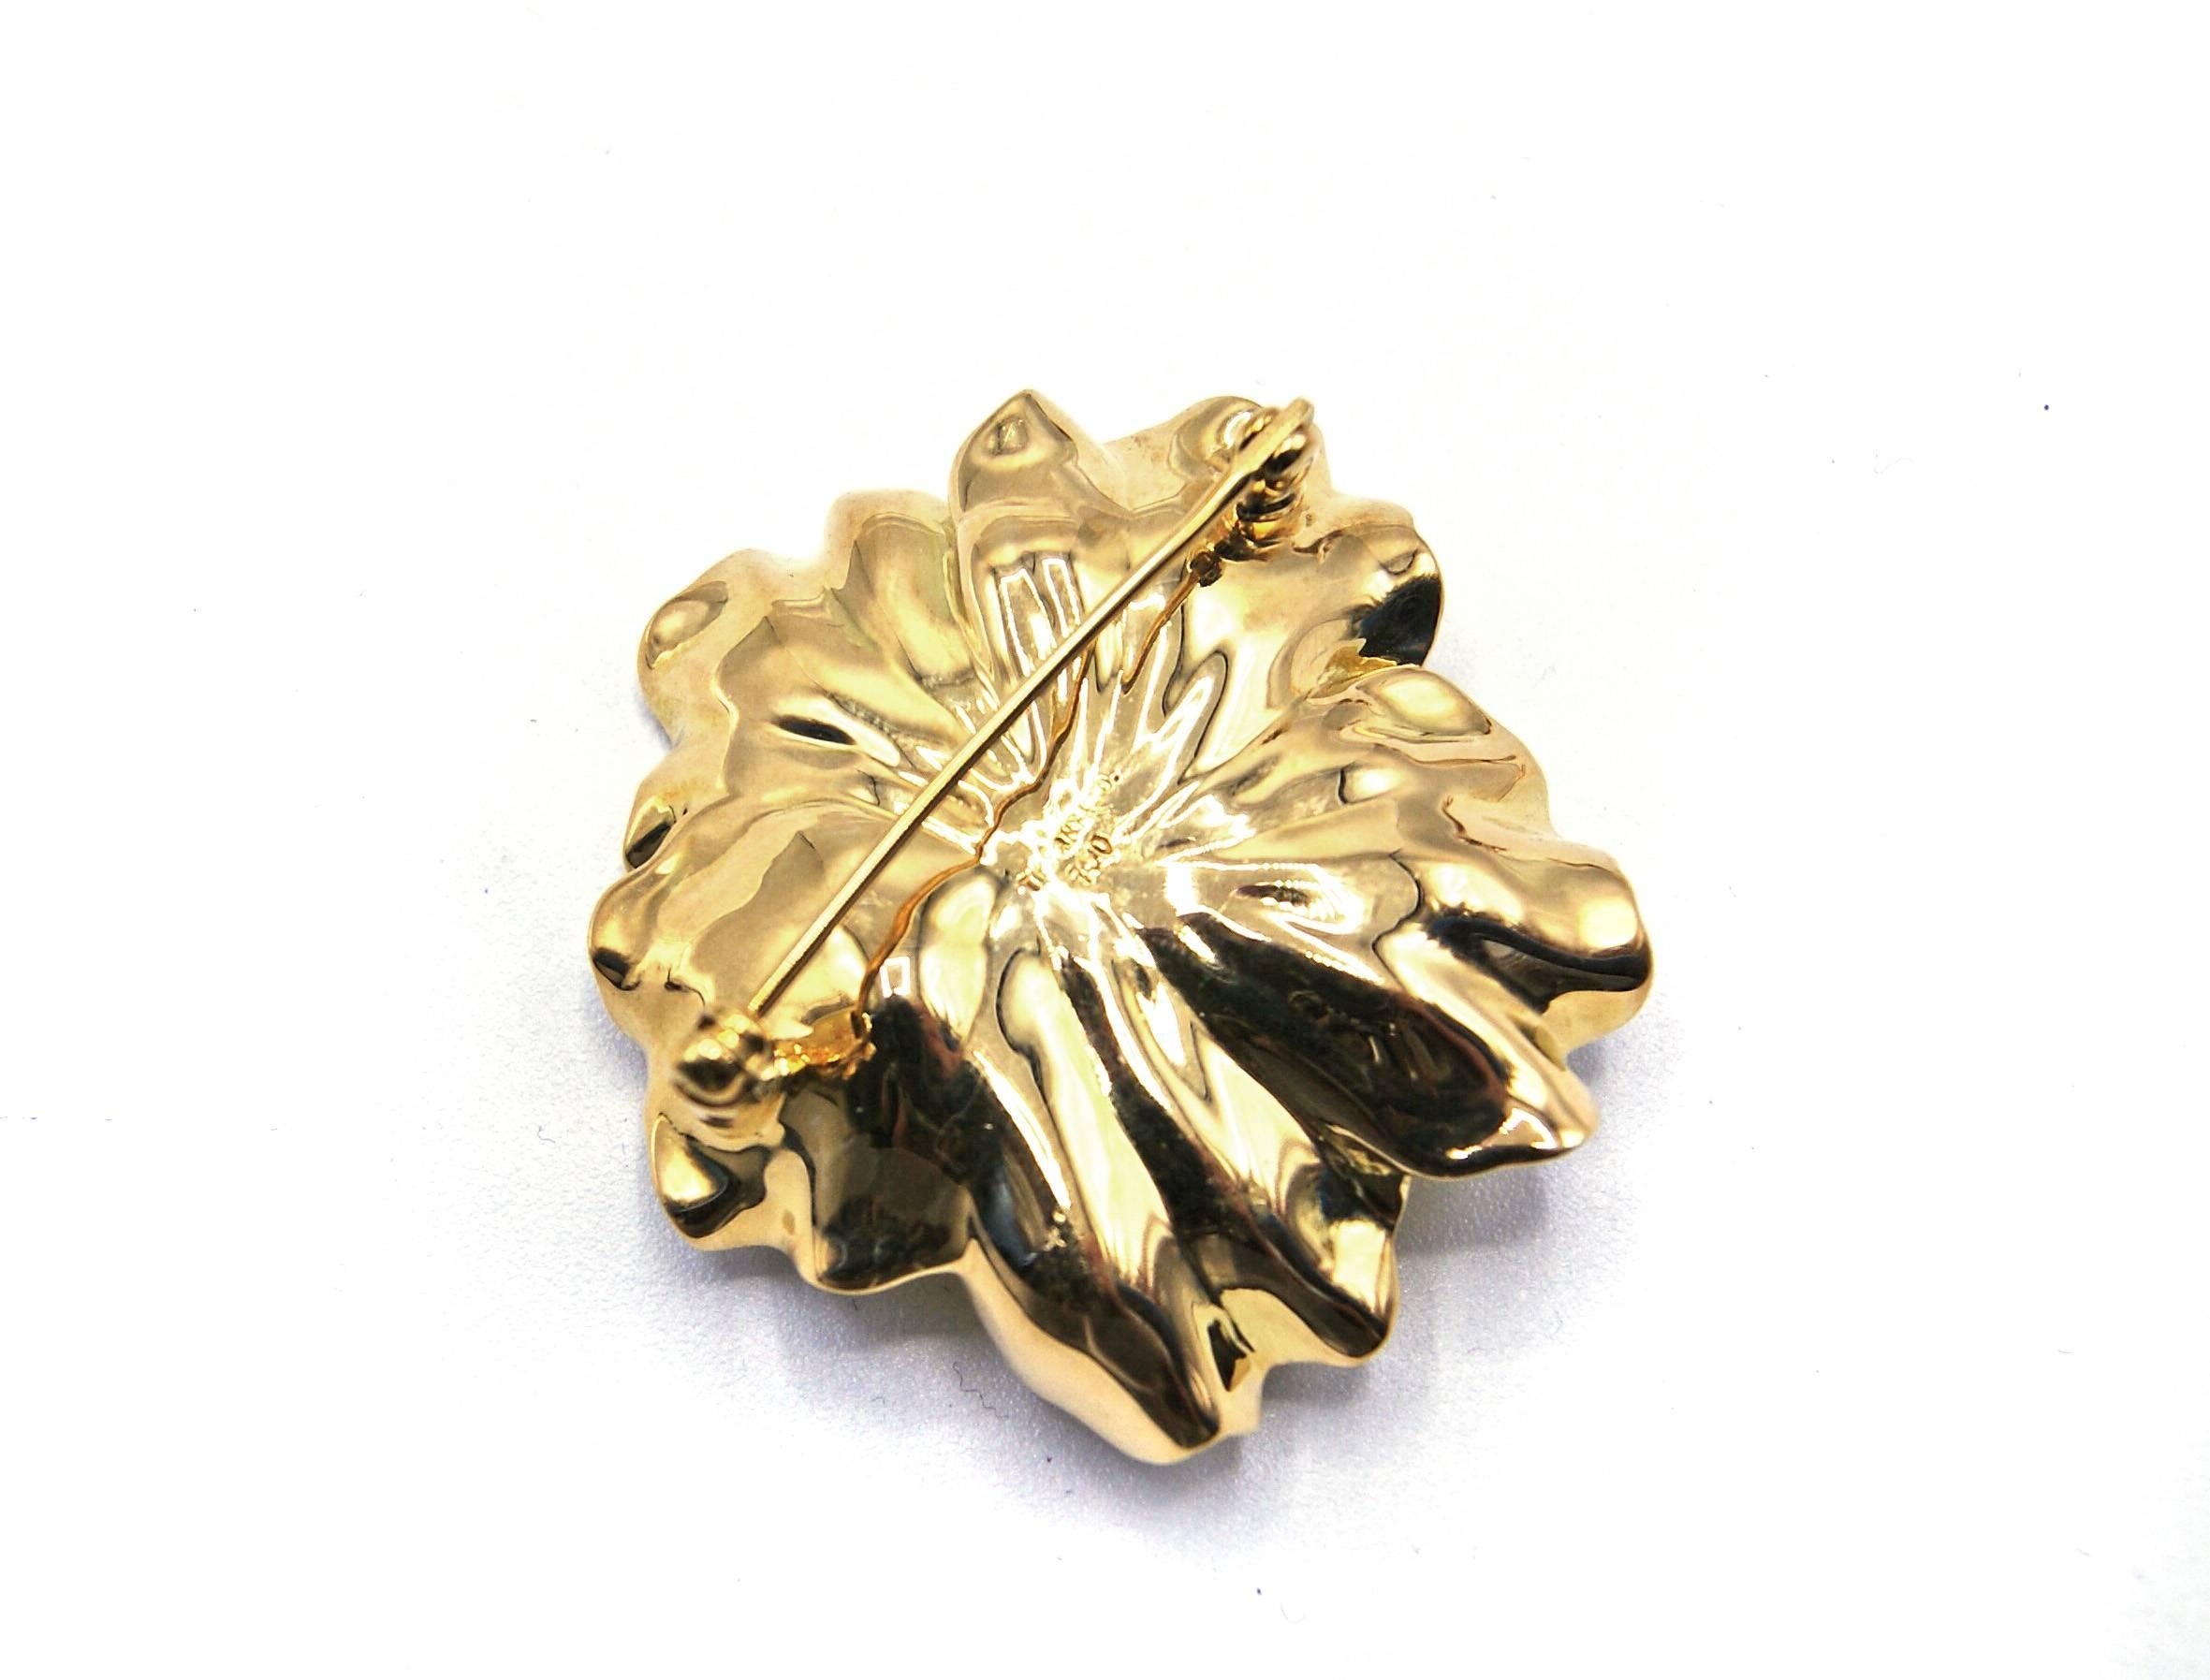 18 karat yellow gold and diamond Tiffany & Co Dogwood flower brooch. The 3 dimensional fine and textured hand crafted gold work of this brooch depicts the blossoms of the Japanese Dogwood tree which was used by Louis Comfort Tiffany in his early